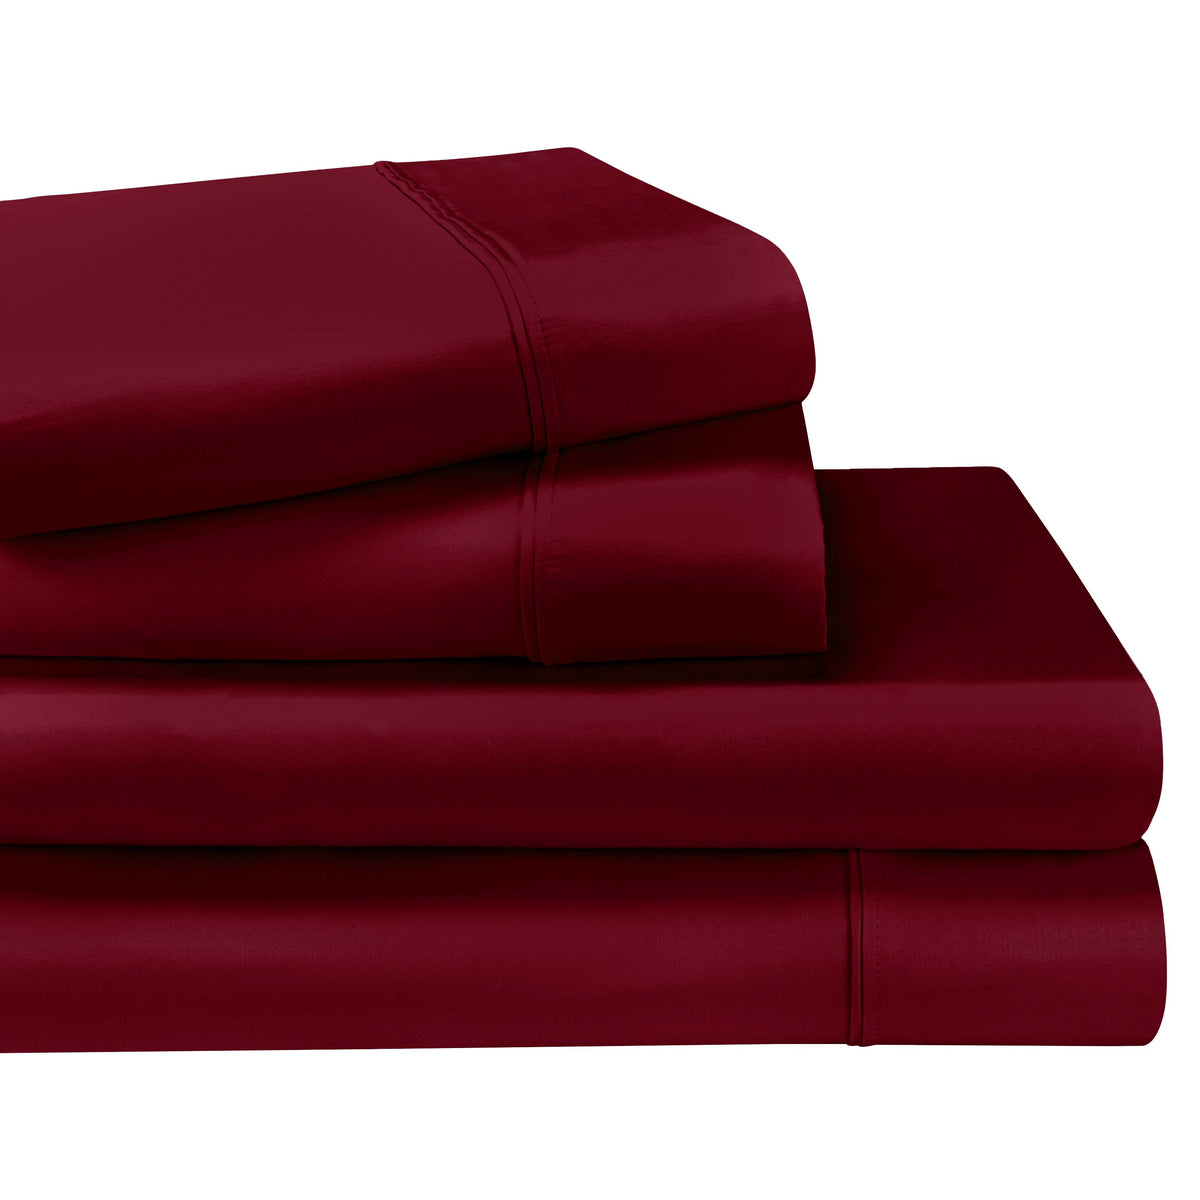 Egyptian Cotton 1200 Thread Count Eco-Friendly Solid Sheet Set